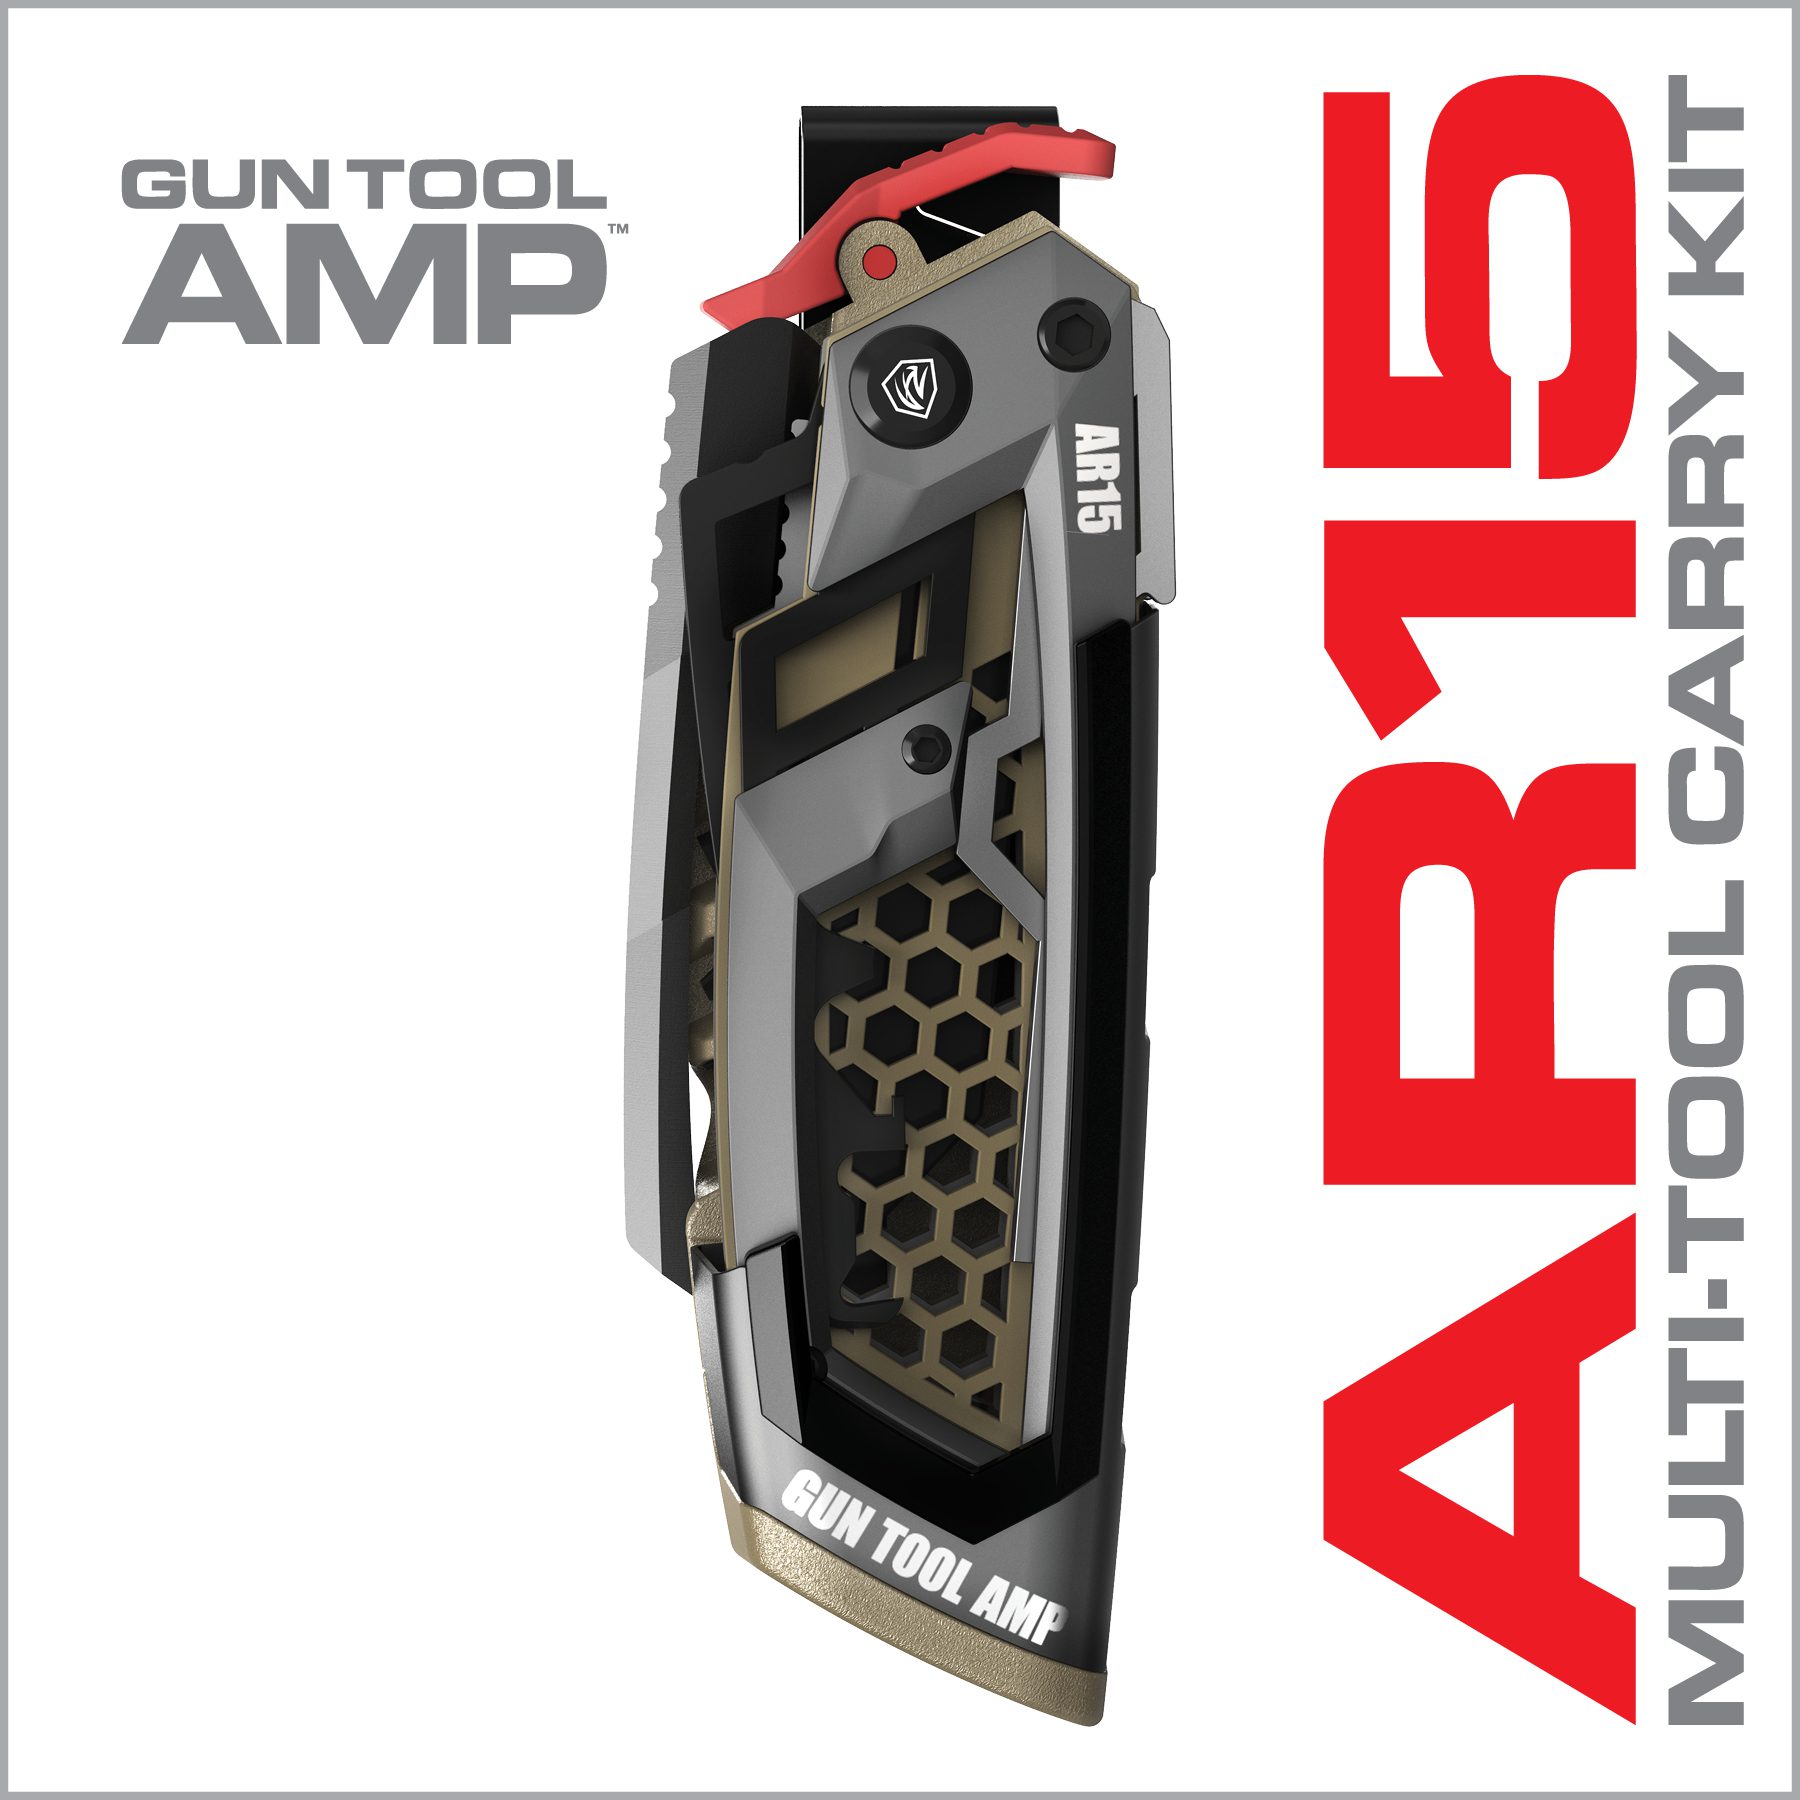 the gun tool amp is designed to look like an armor